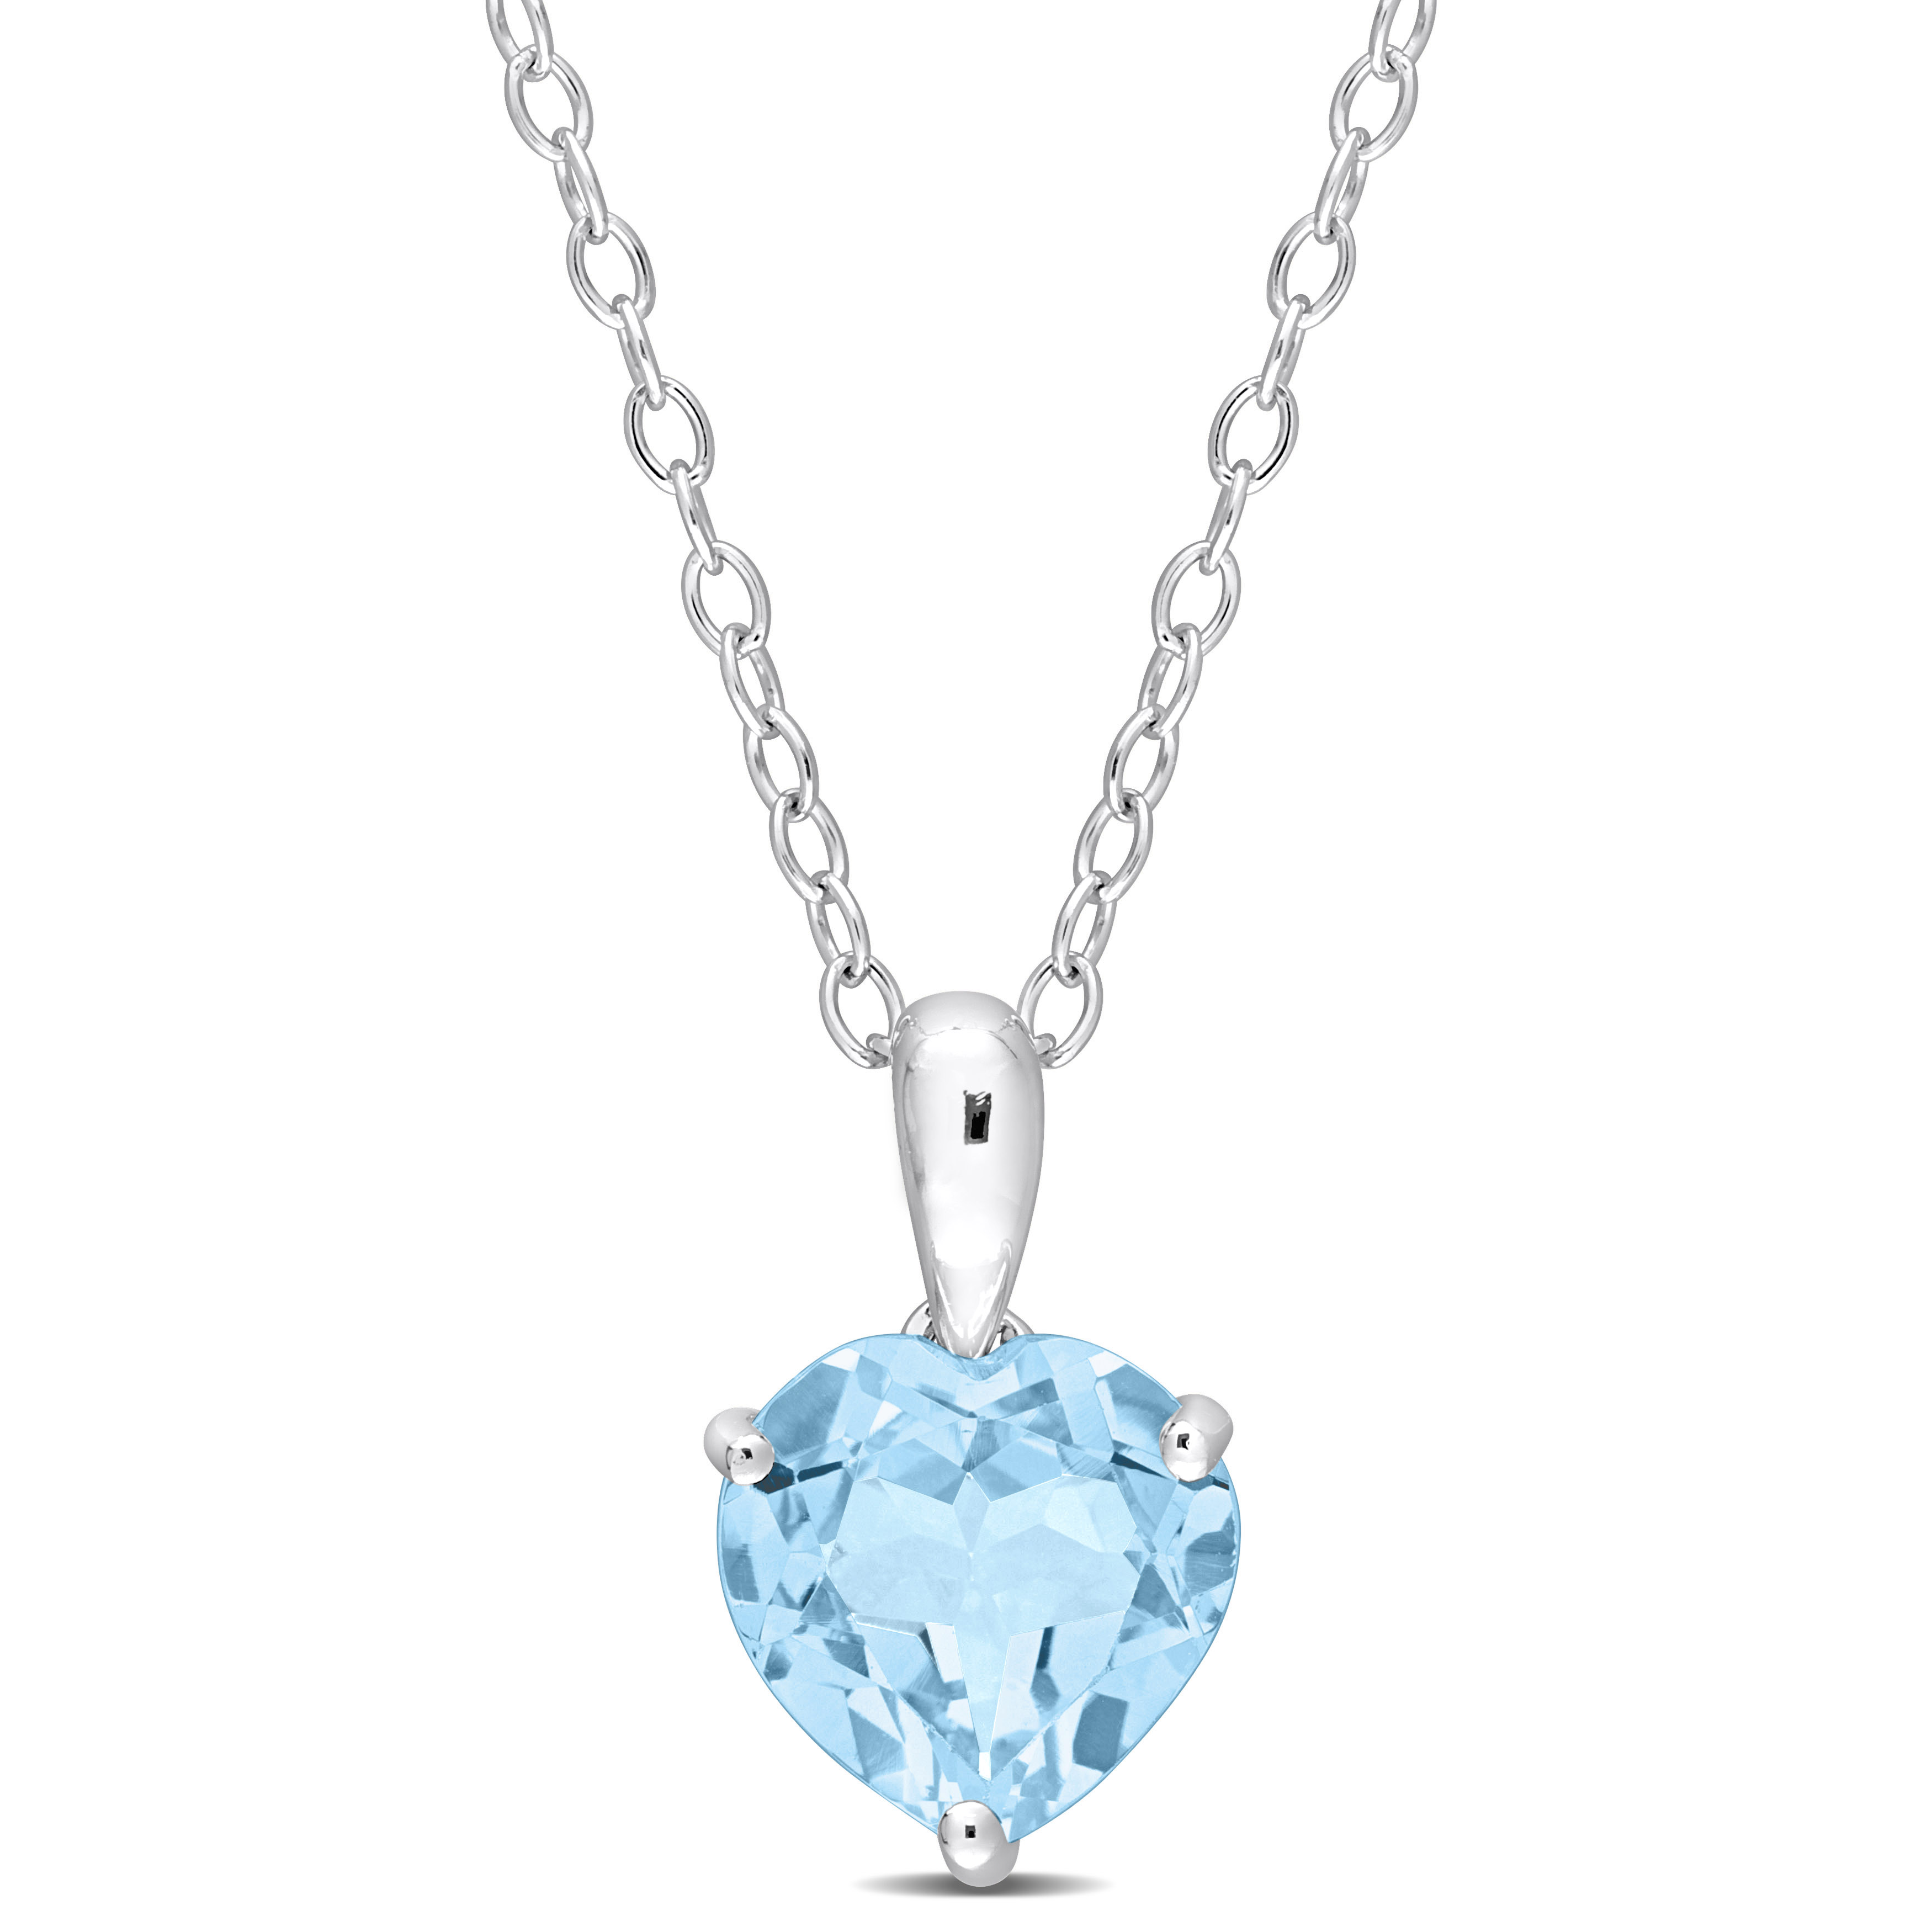 2 CT TGW Heart Shape Sky Blue Topaz Solitaire Heart Design Pendant with Chain in Sterling Silver - 18 in.